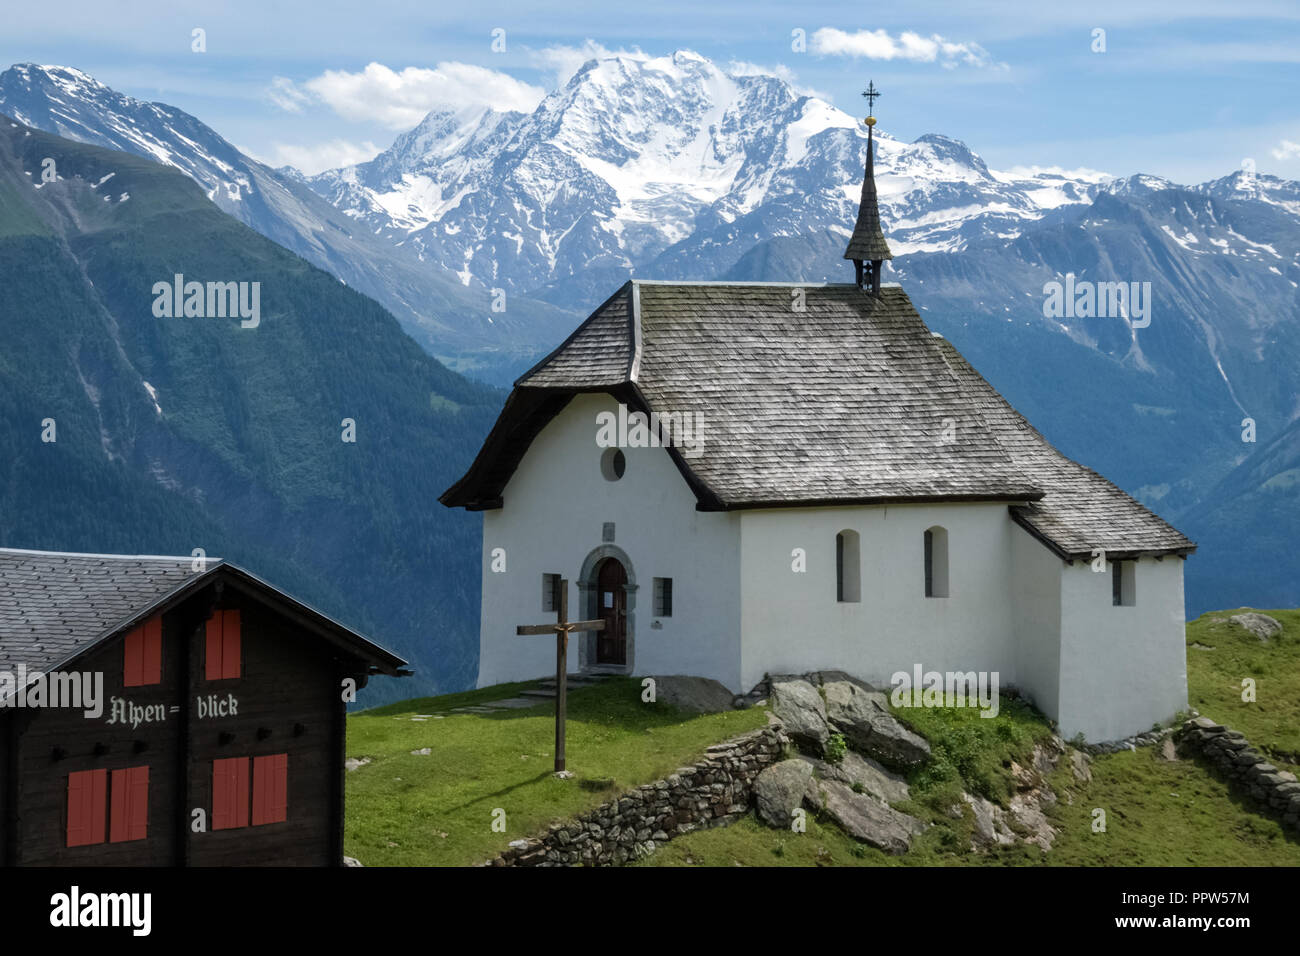 Near the village of Bettmeralp in the canton of Valais (Switzerland) a small white church is standing in the green fields Stock Photo